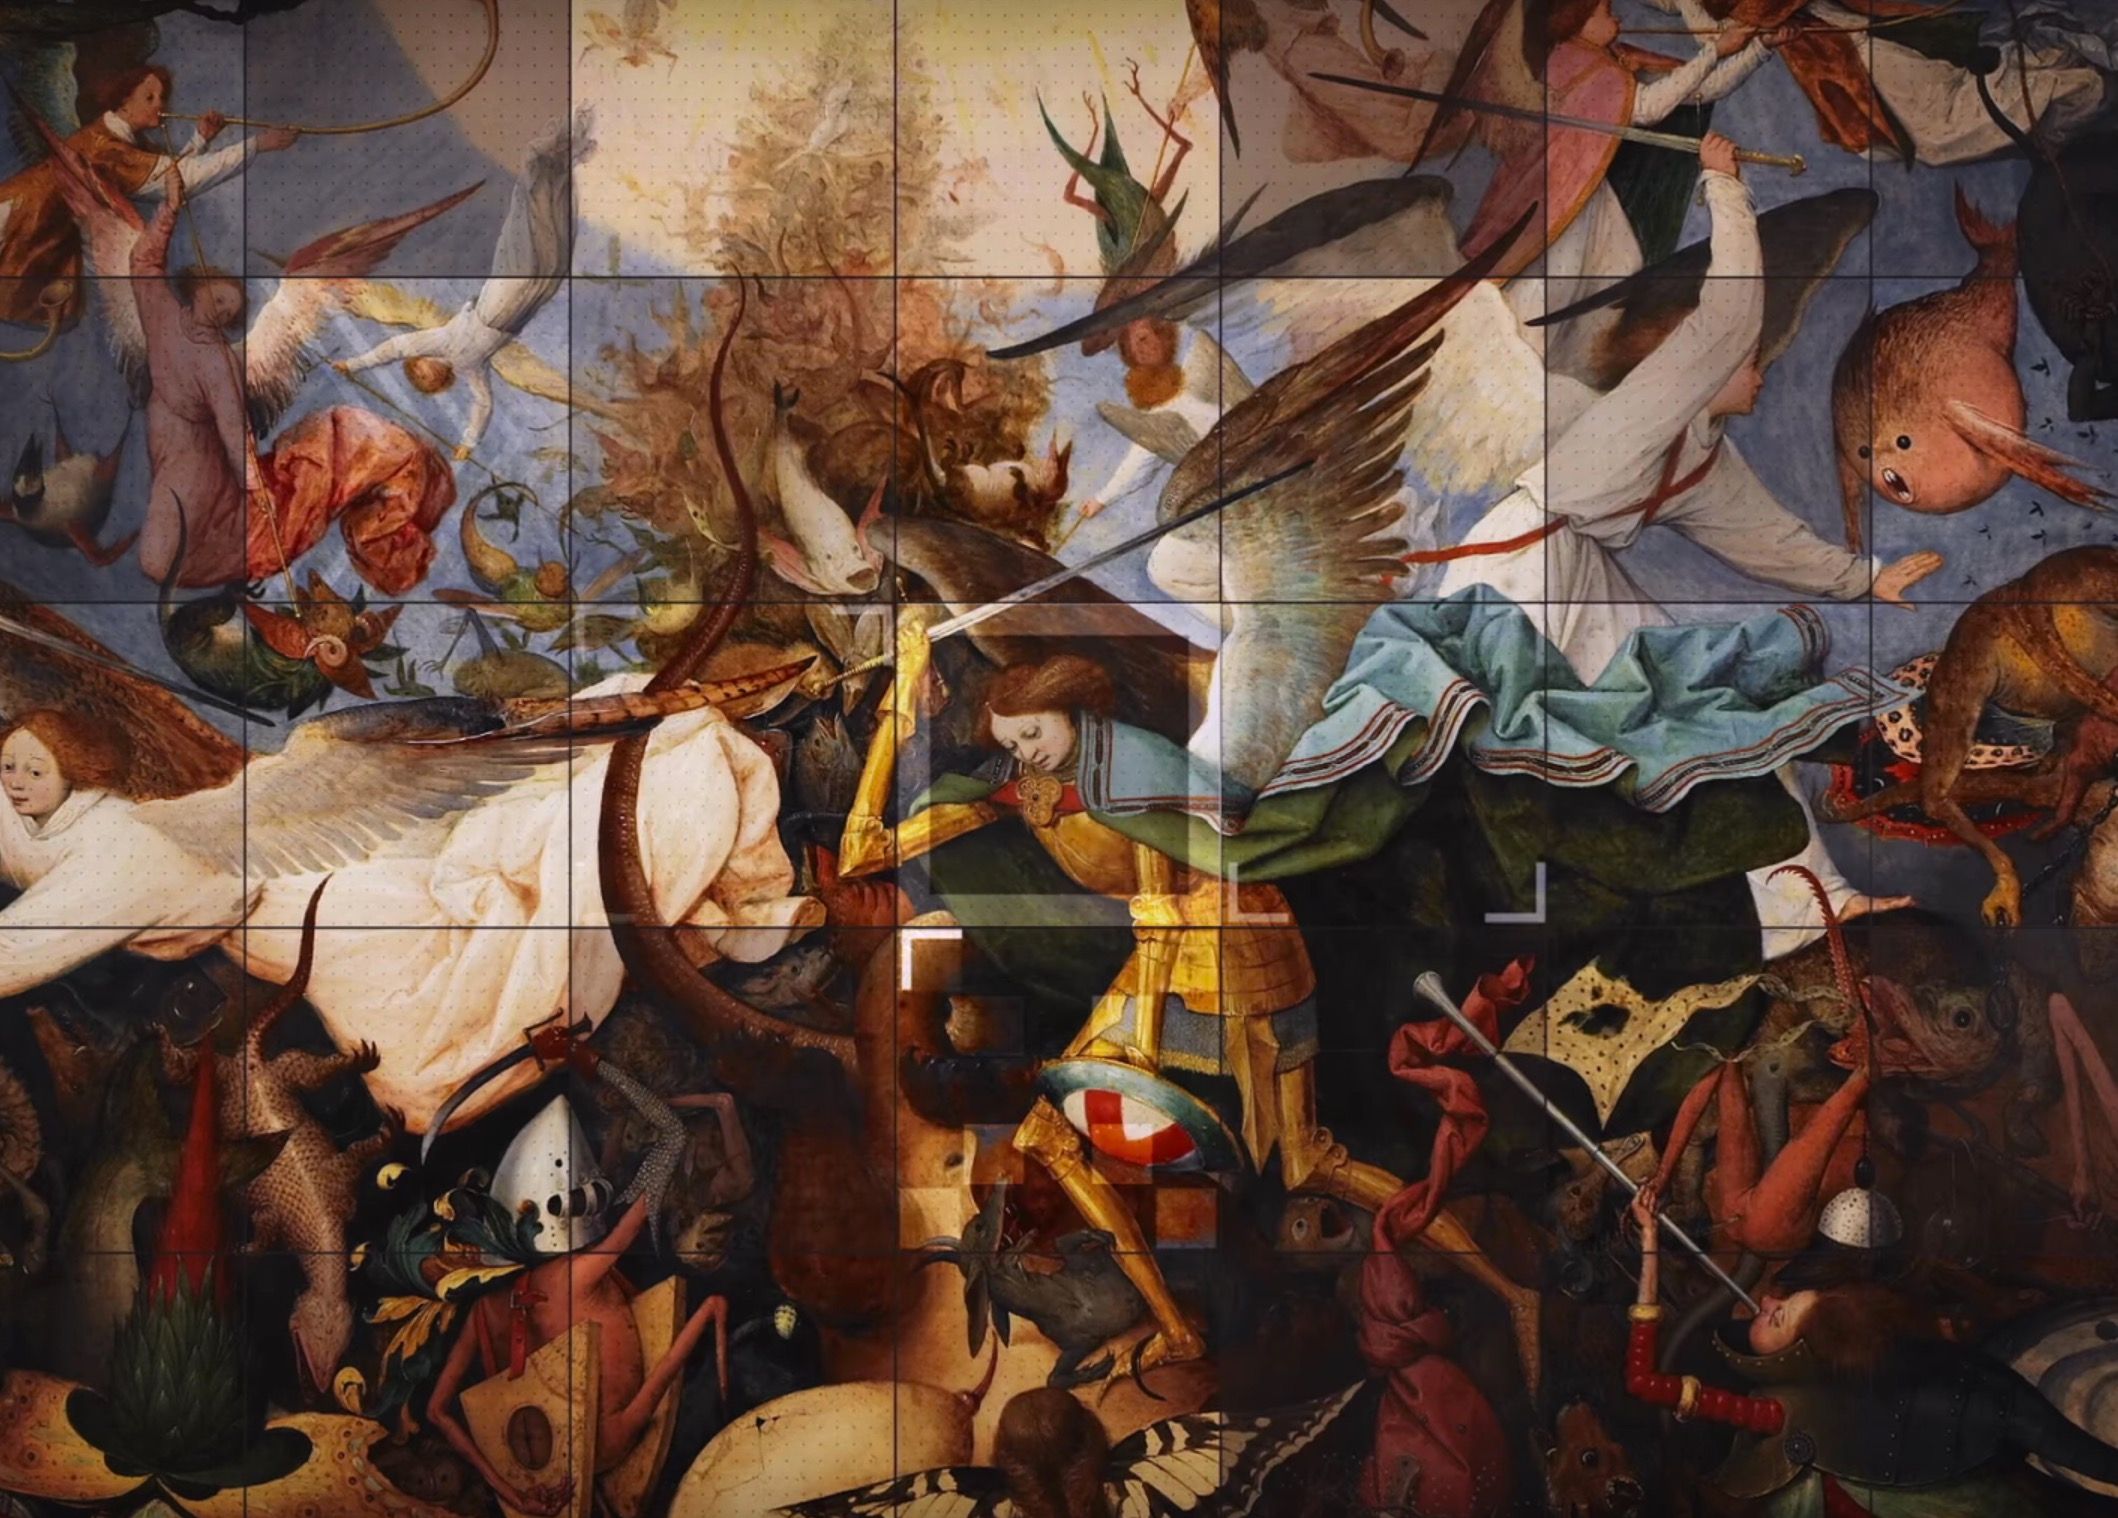 google is using vr to let you step inside this 16th century bruegel painting image 1